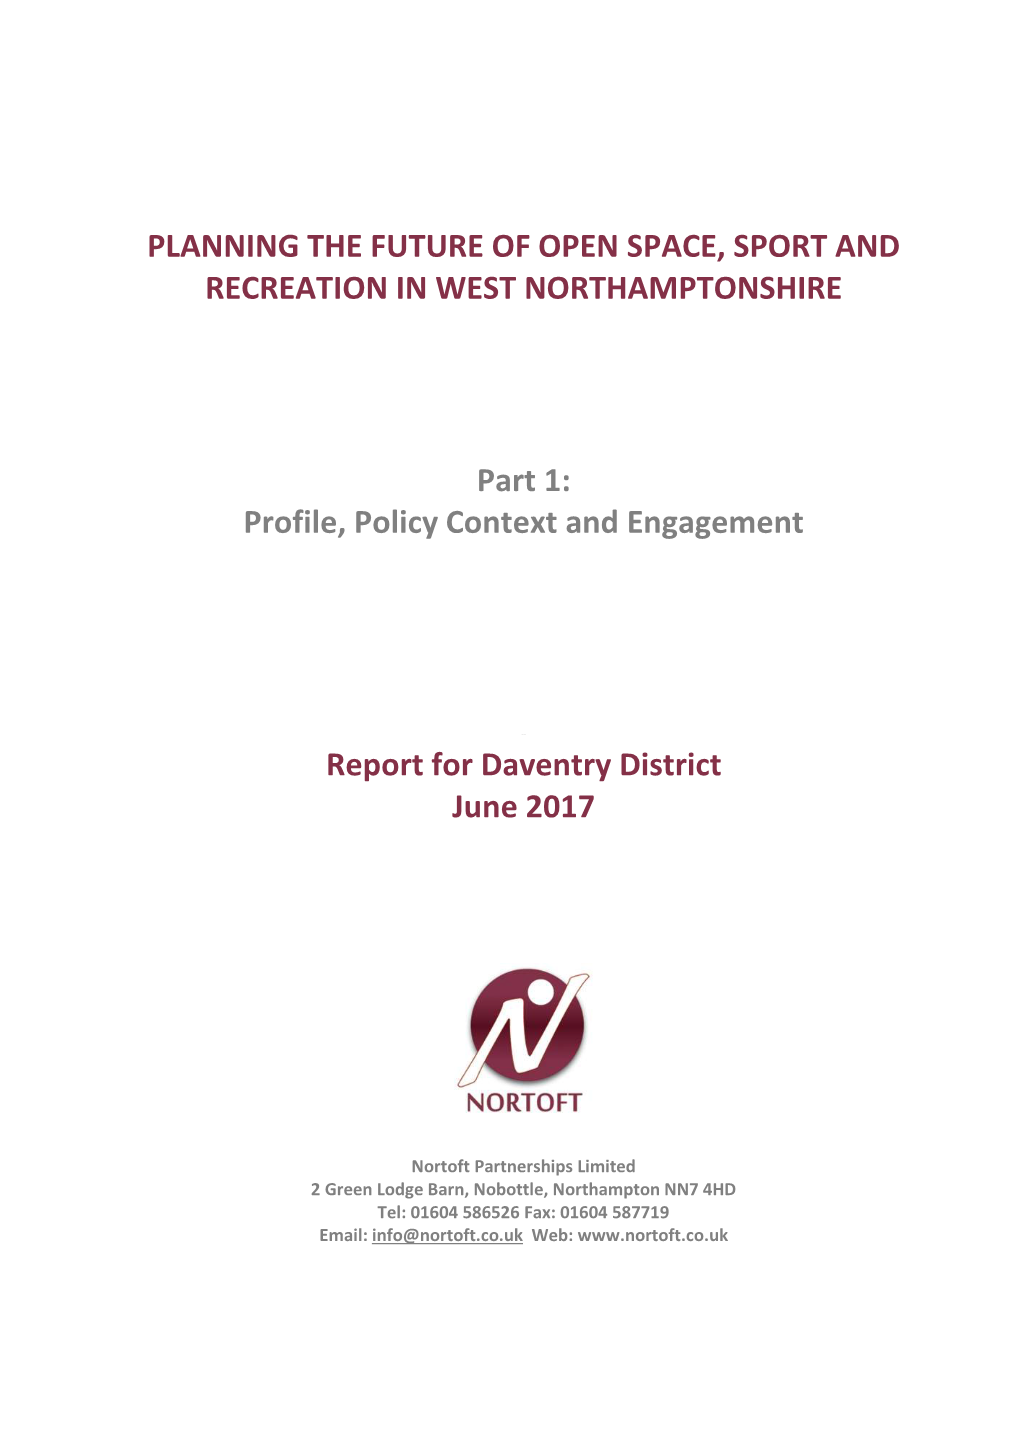 PLANNING the FUTURE of OPEN SPACE, SPORT and RECREATION in WEST NORTHAMPTONSHIRE Part 1